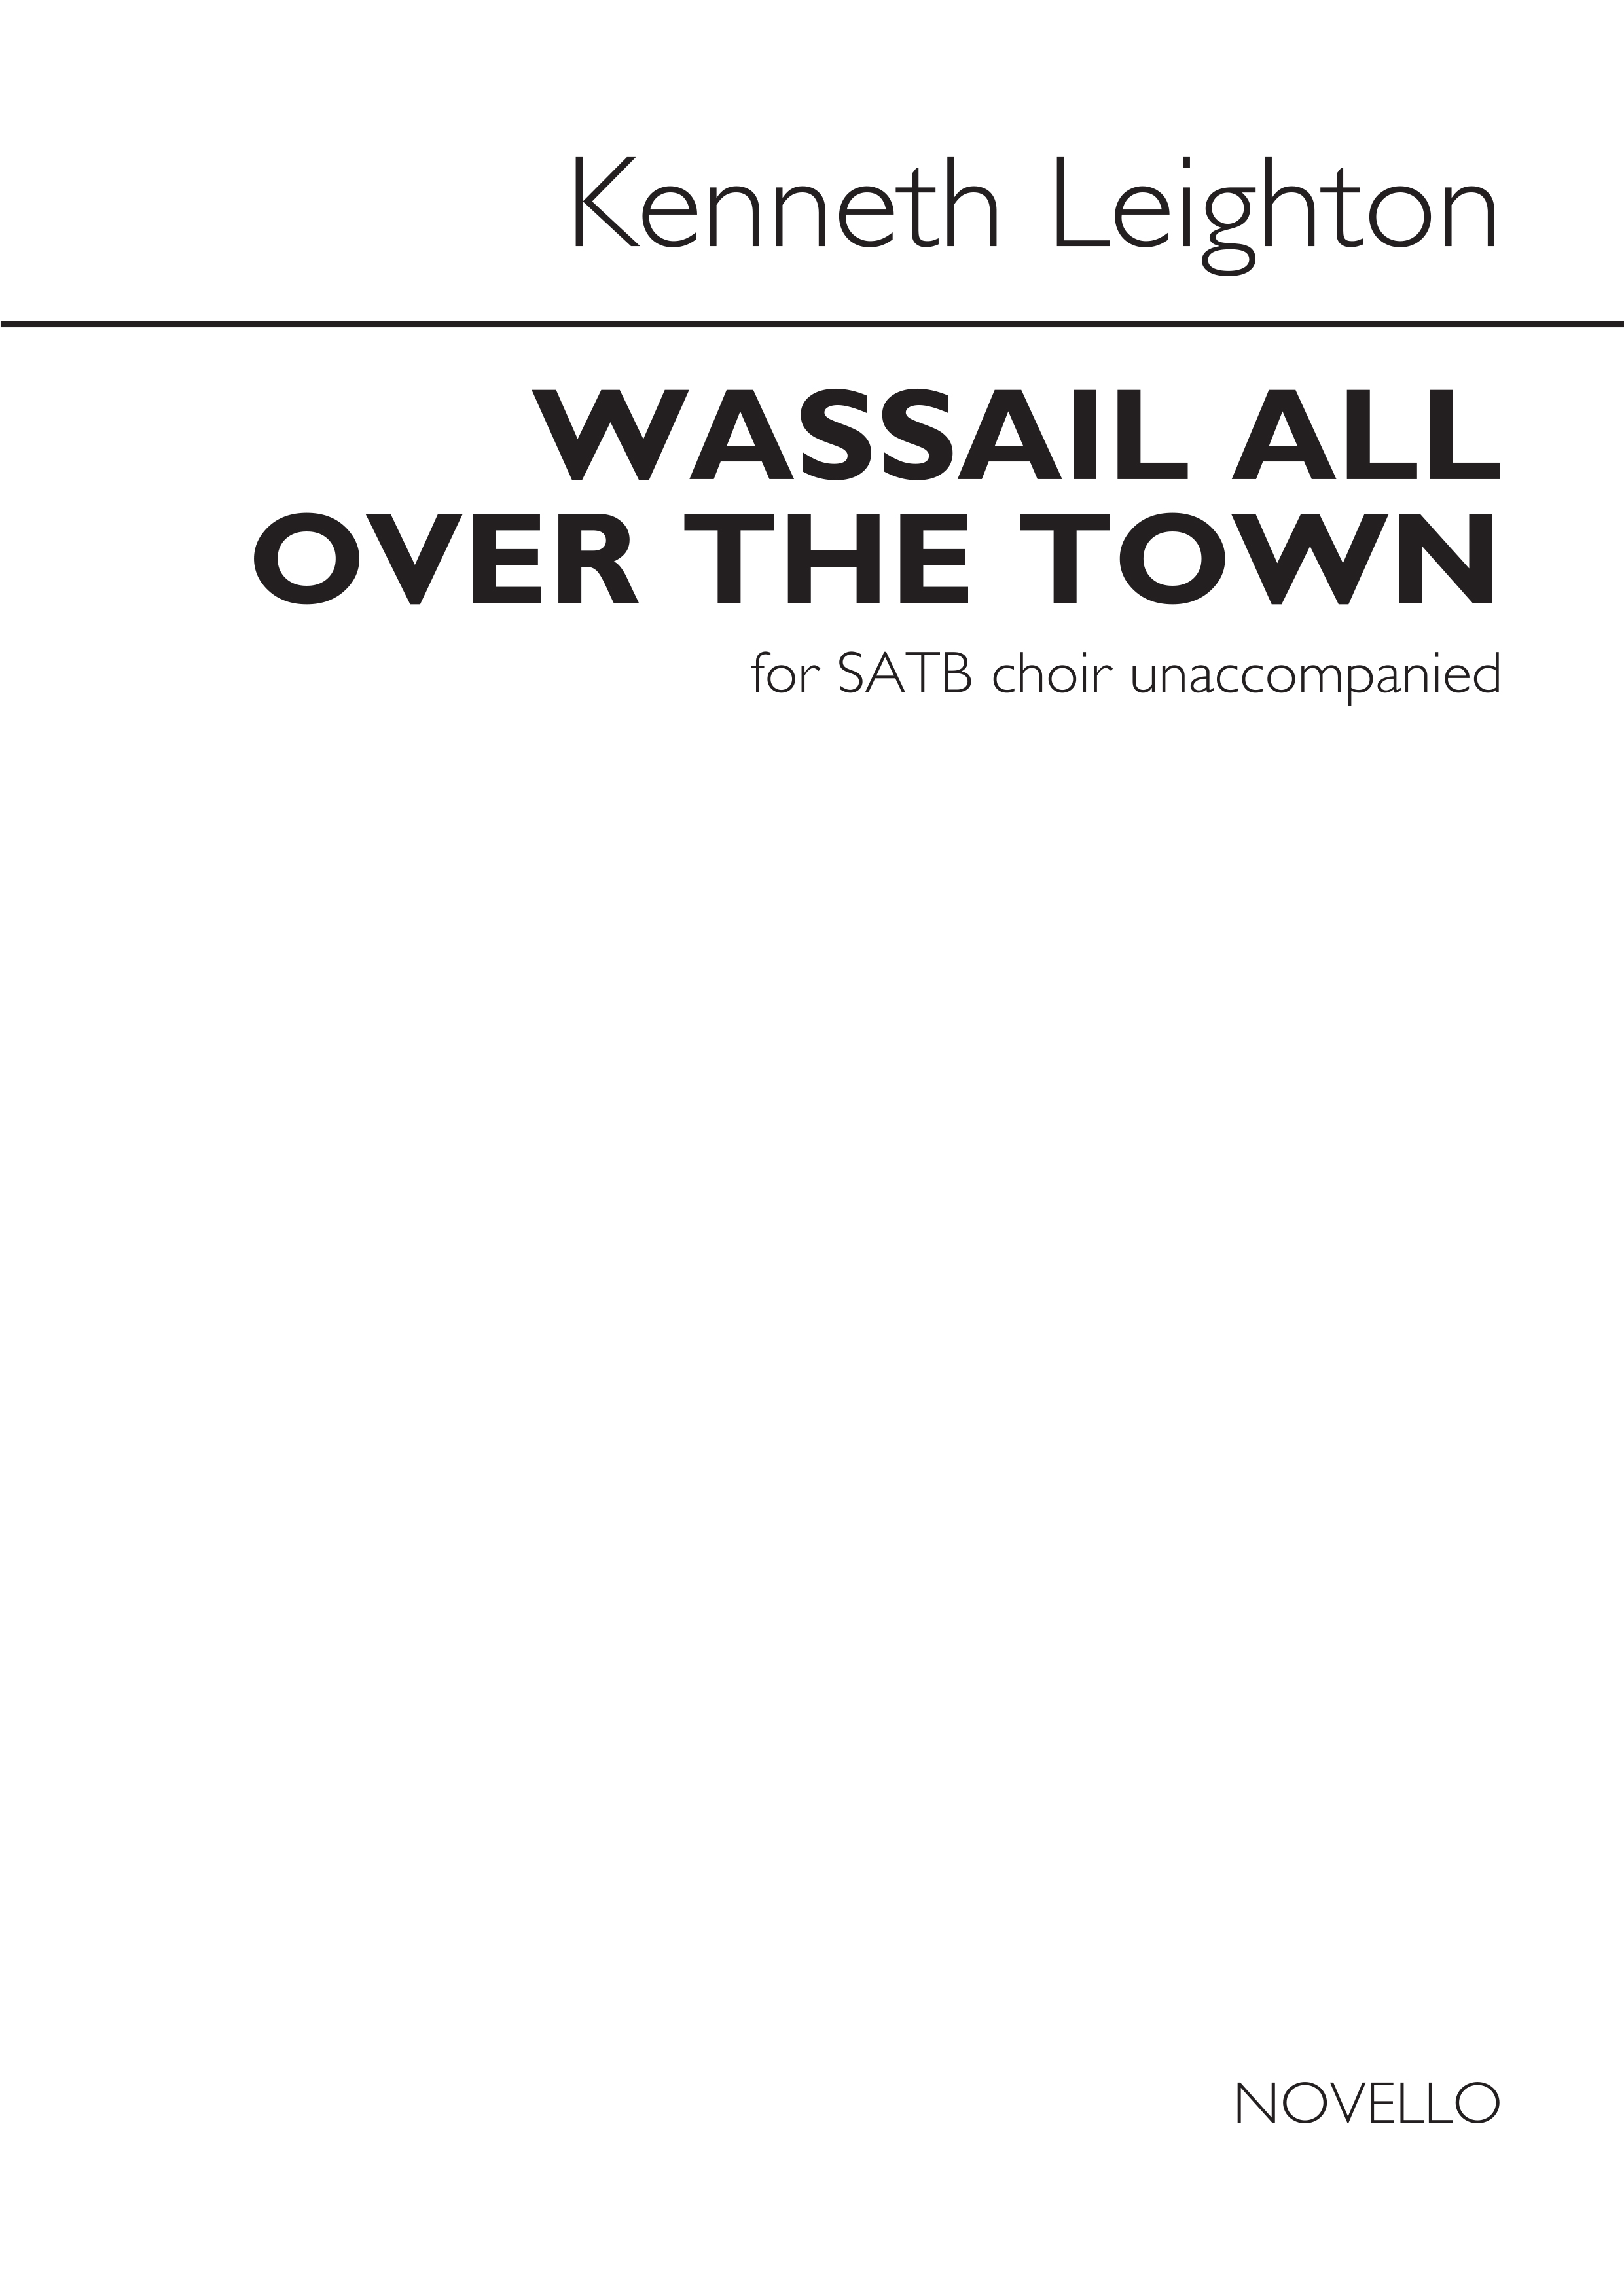 Kenneth Leighton: Wassail All Over The Town: SATB: Vocal Score